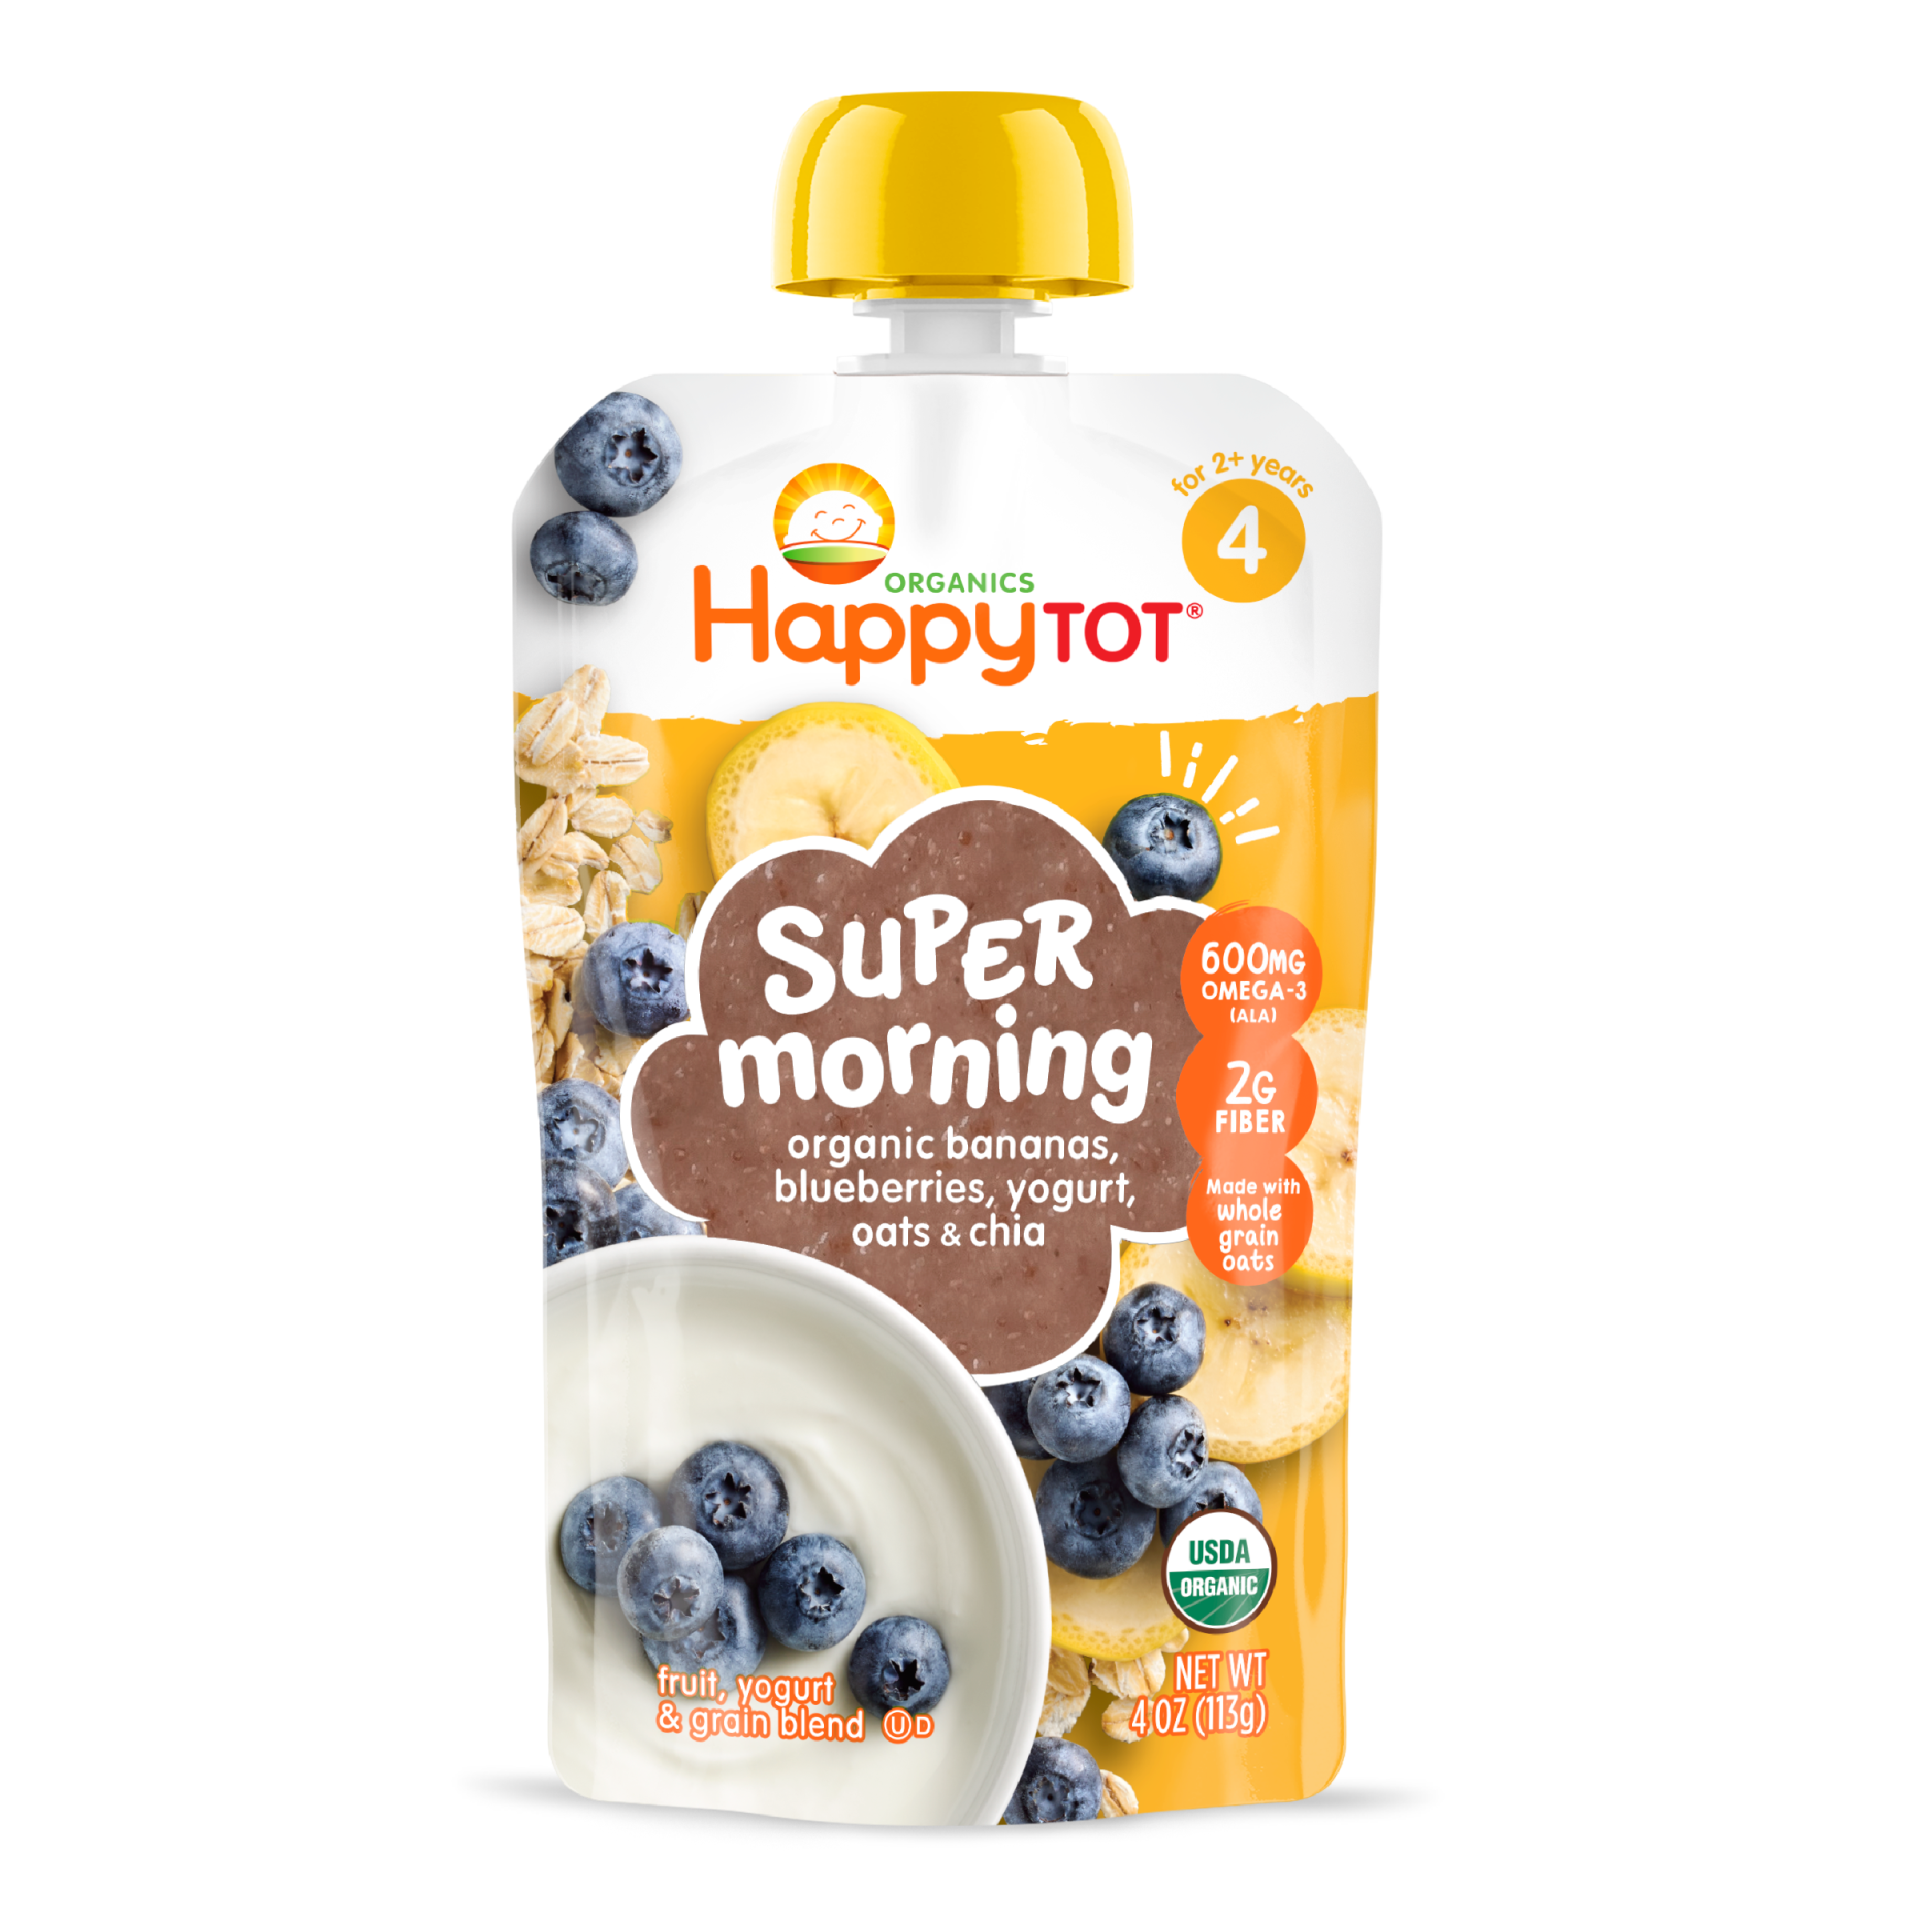 Happy Tot Super Morning Stage 4 Organic Bananas, Blueberries, Yogurt & Oats with Super Chia Pouch 16 units per case 4.0 oz